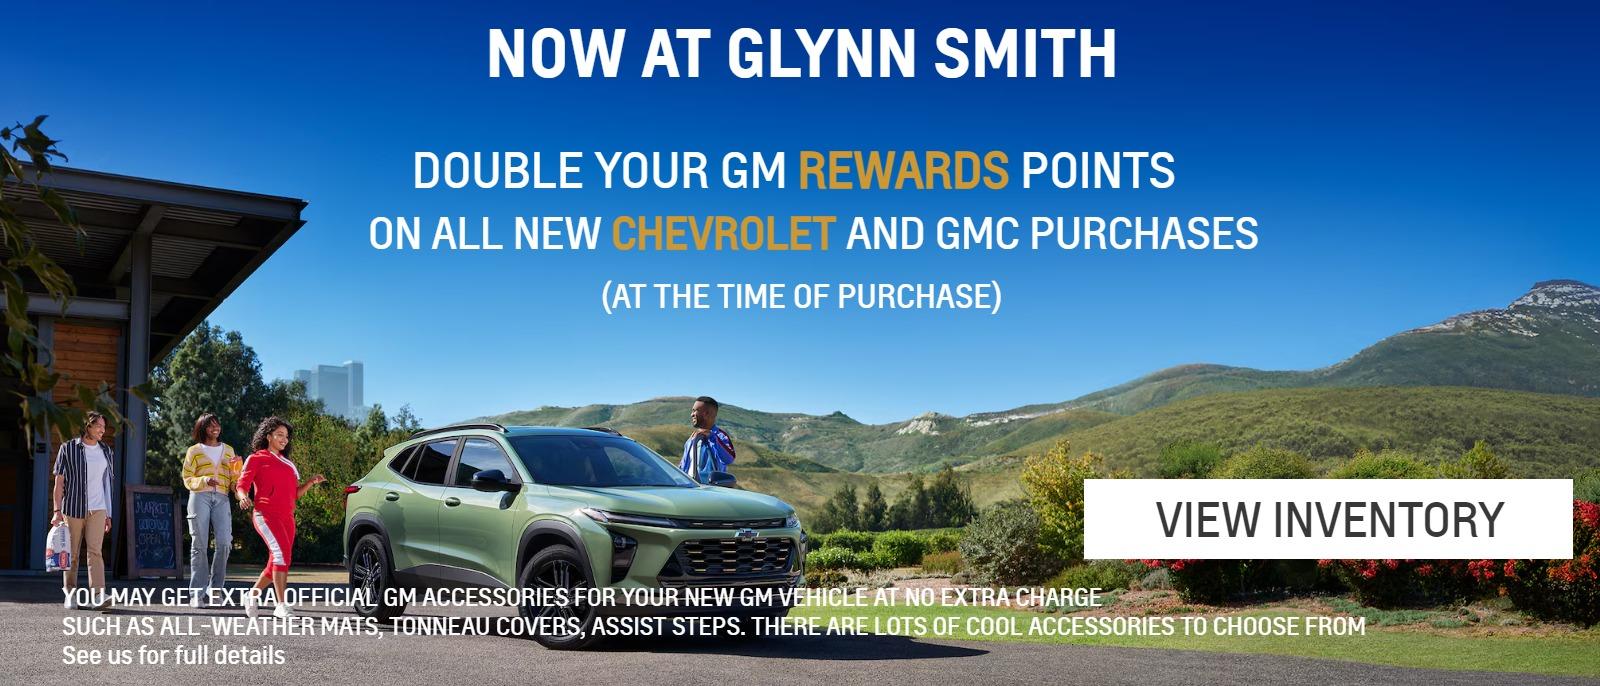 NOW At Glynn Smith
DOUBLE YOUR GM REWARDS POINTS
On All New Chevrolet on GMC Purchases
(at the time of purchase)